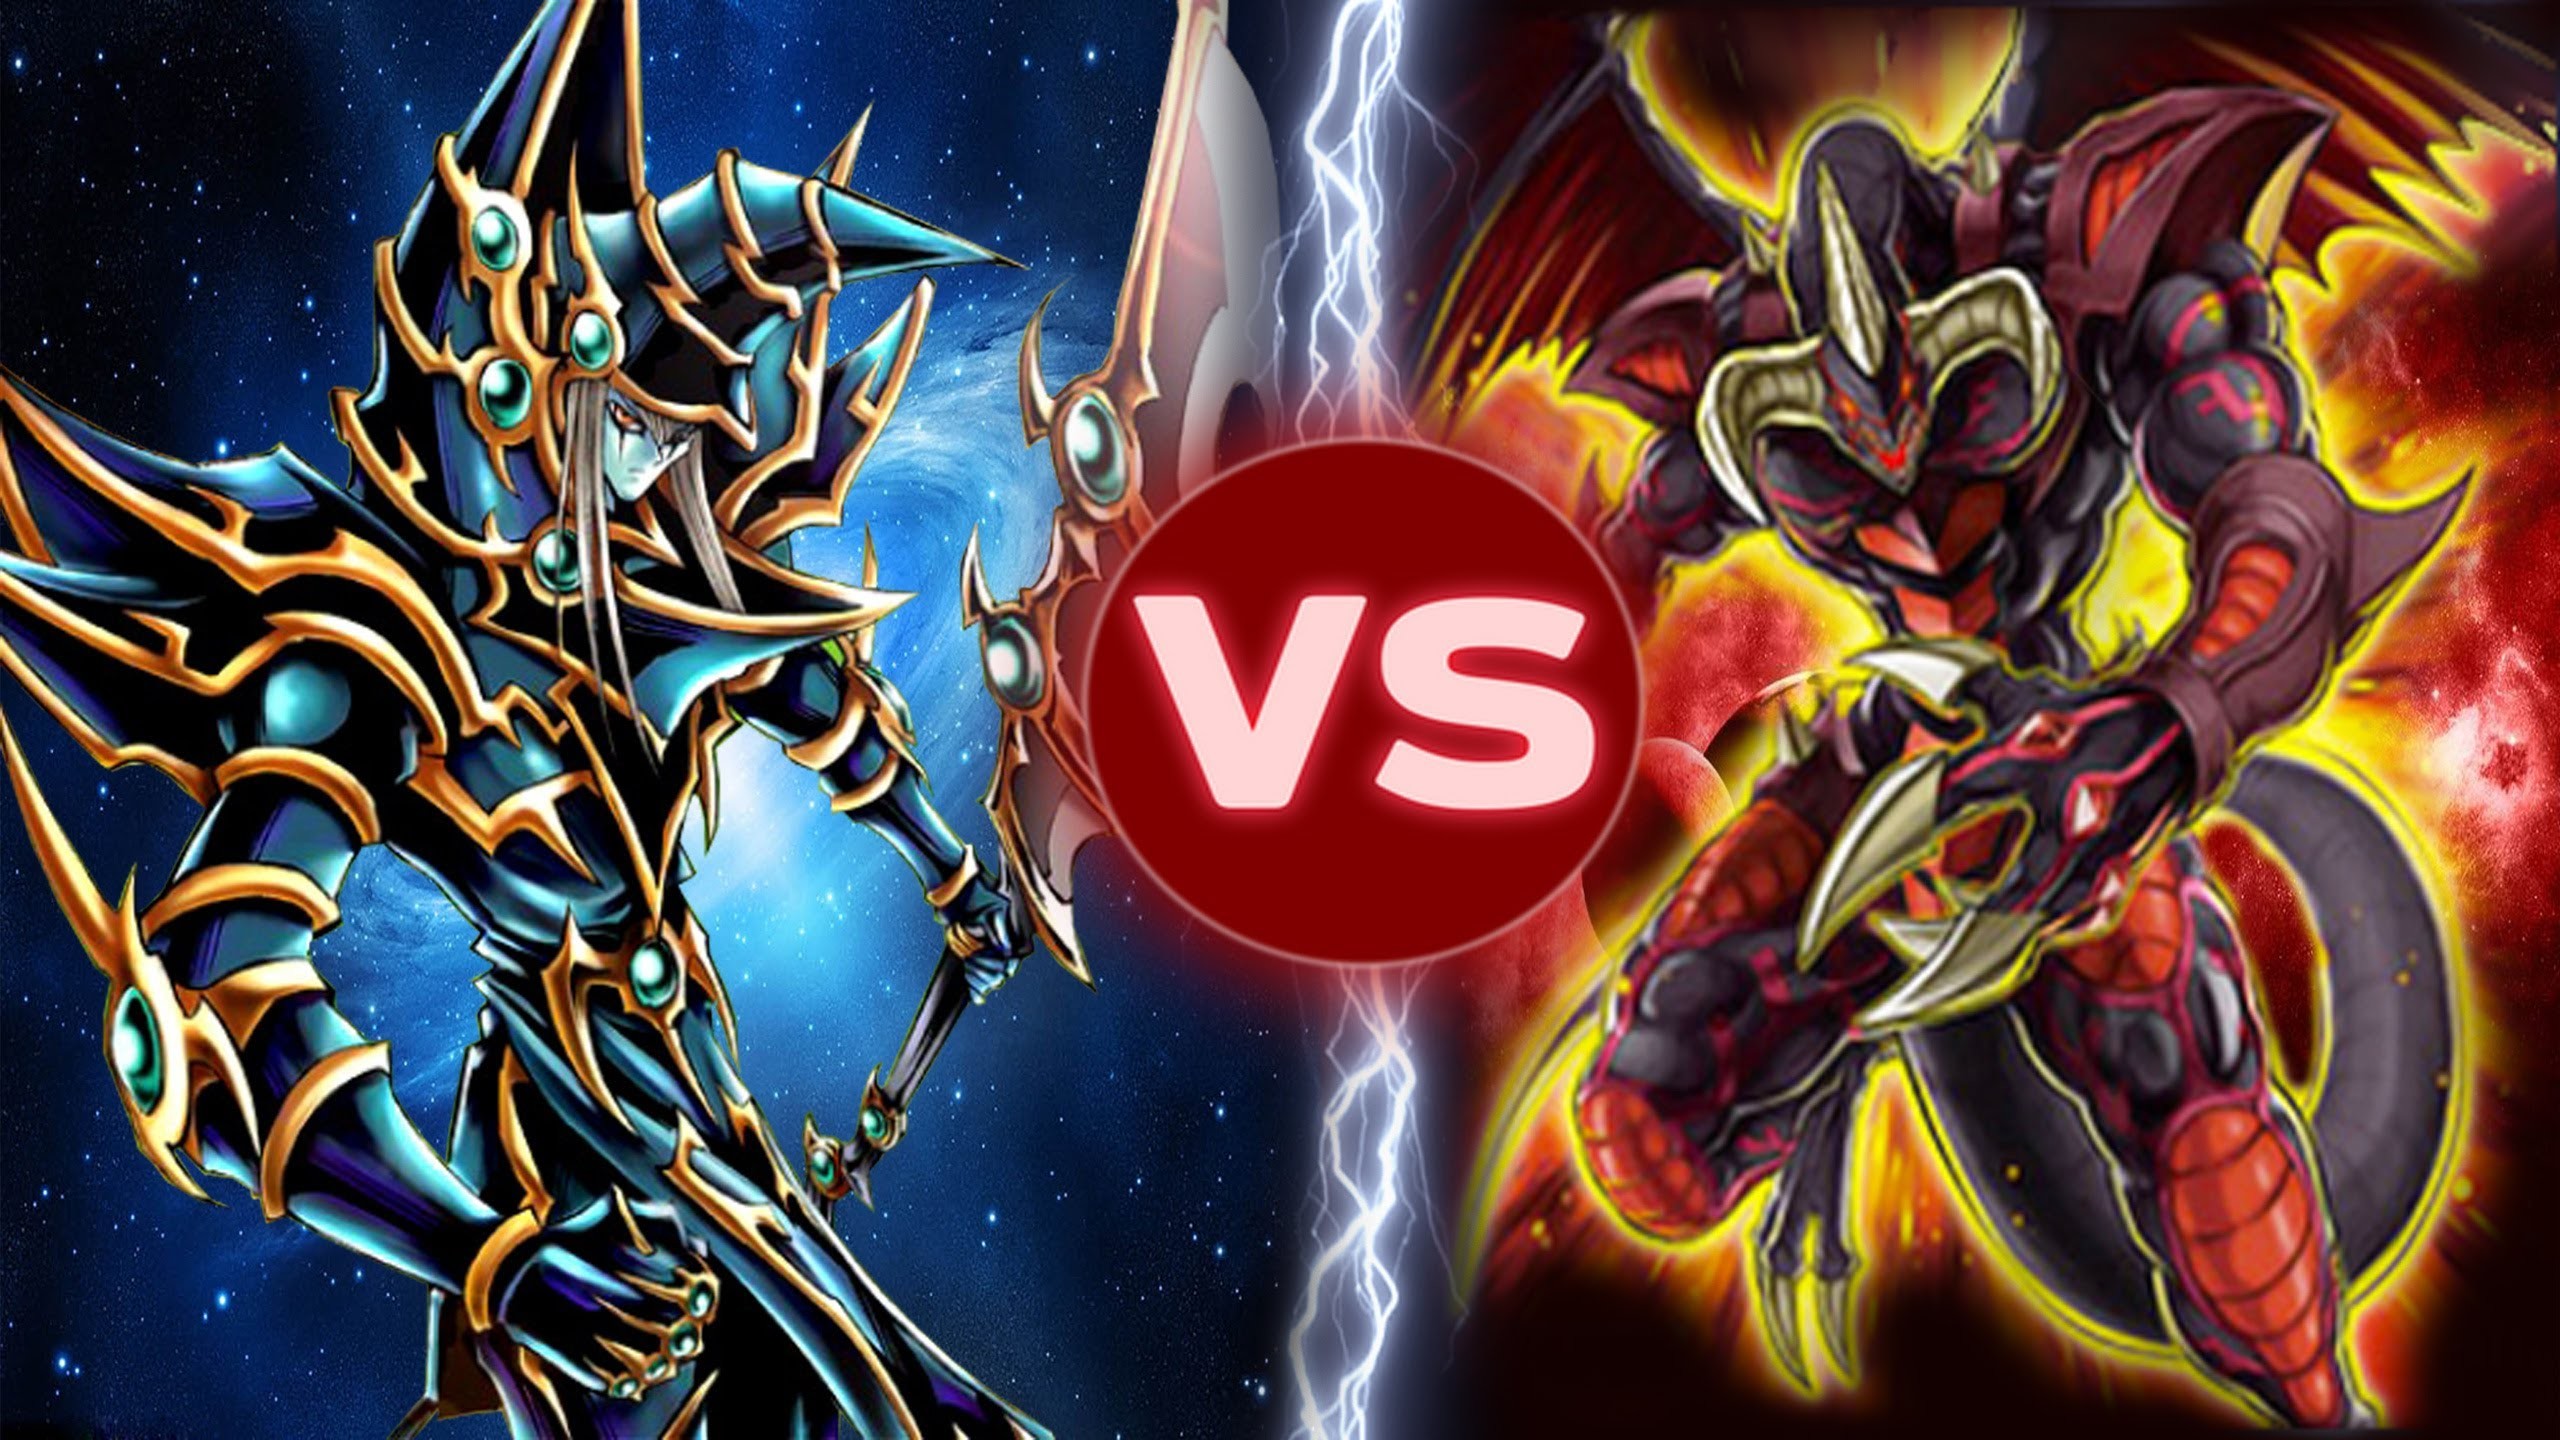 Yugioh Duel – Dark Paladin Vs Jeweled Red Dragon Archfiend October 2013 – YouTube